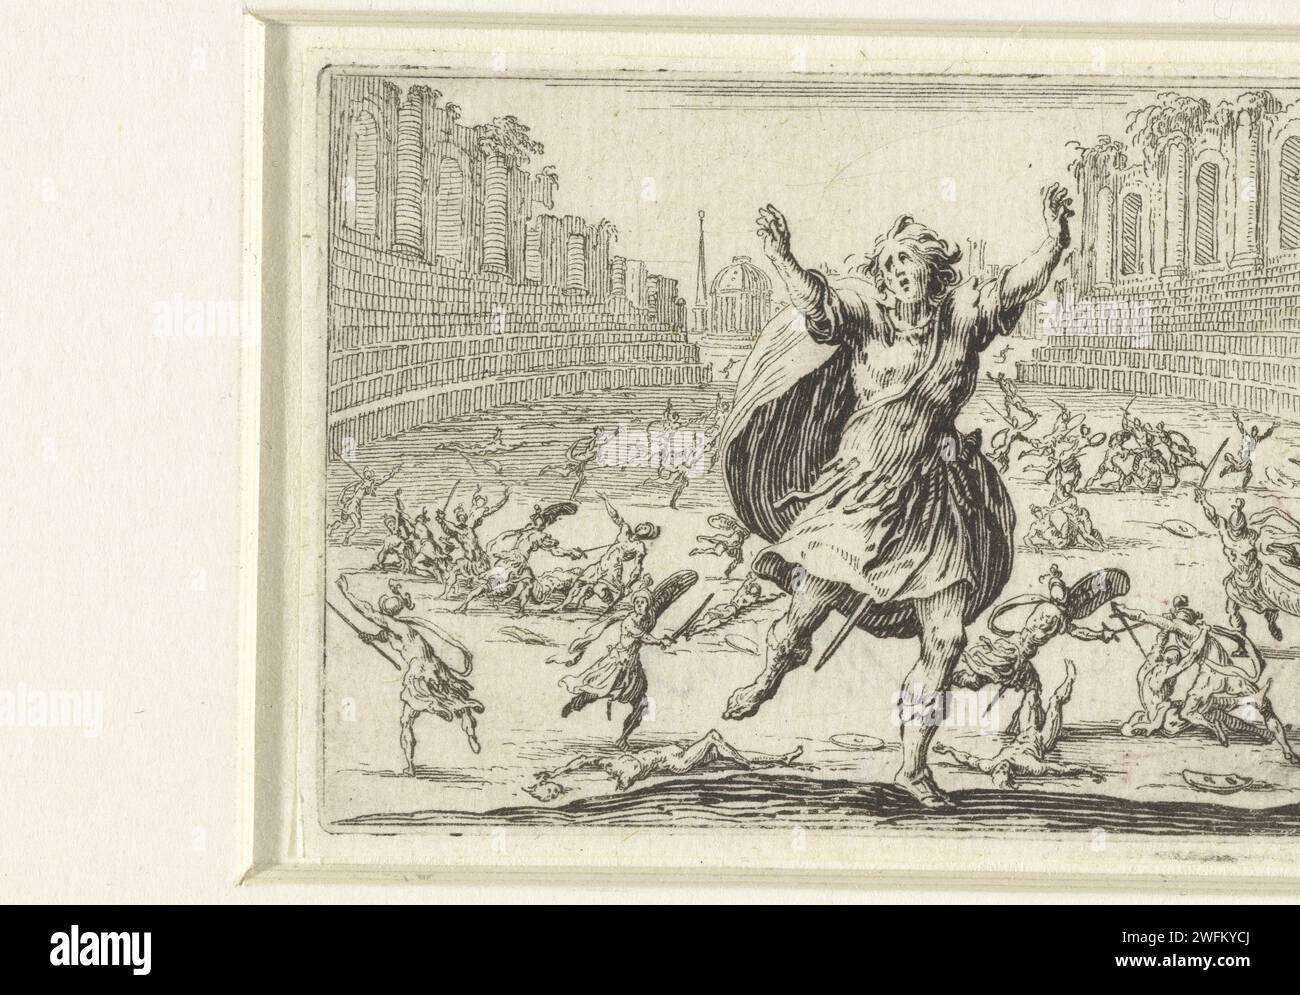 Strijder in panic in a fight in amphitheater, Jacques Callot, 1621 print In the center of the foreground, a man with a sword runs by his side, his arms in a panicky gesture. In the background battles between armed men in a ruinous amphitheater. This print is part of a series of 48 prints (50 incl. Title page and dicing sheet) with various topics (including men and women in different postures, landscapes, buildings and festivities in Florence). These prints may have been intended as drawing examples. Nancy paper etching hand-to-hand fighting ( battle). fight of gladiators. ruin of a building  Stock Photo